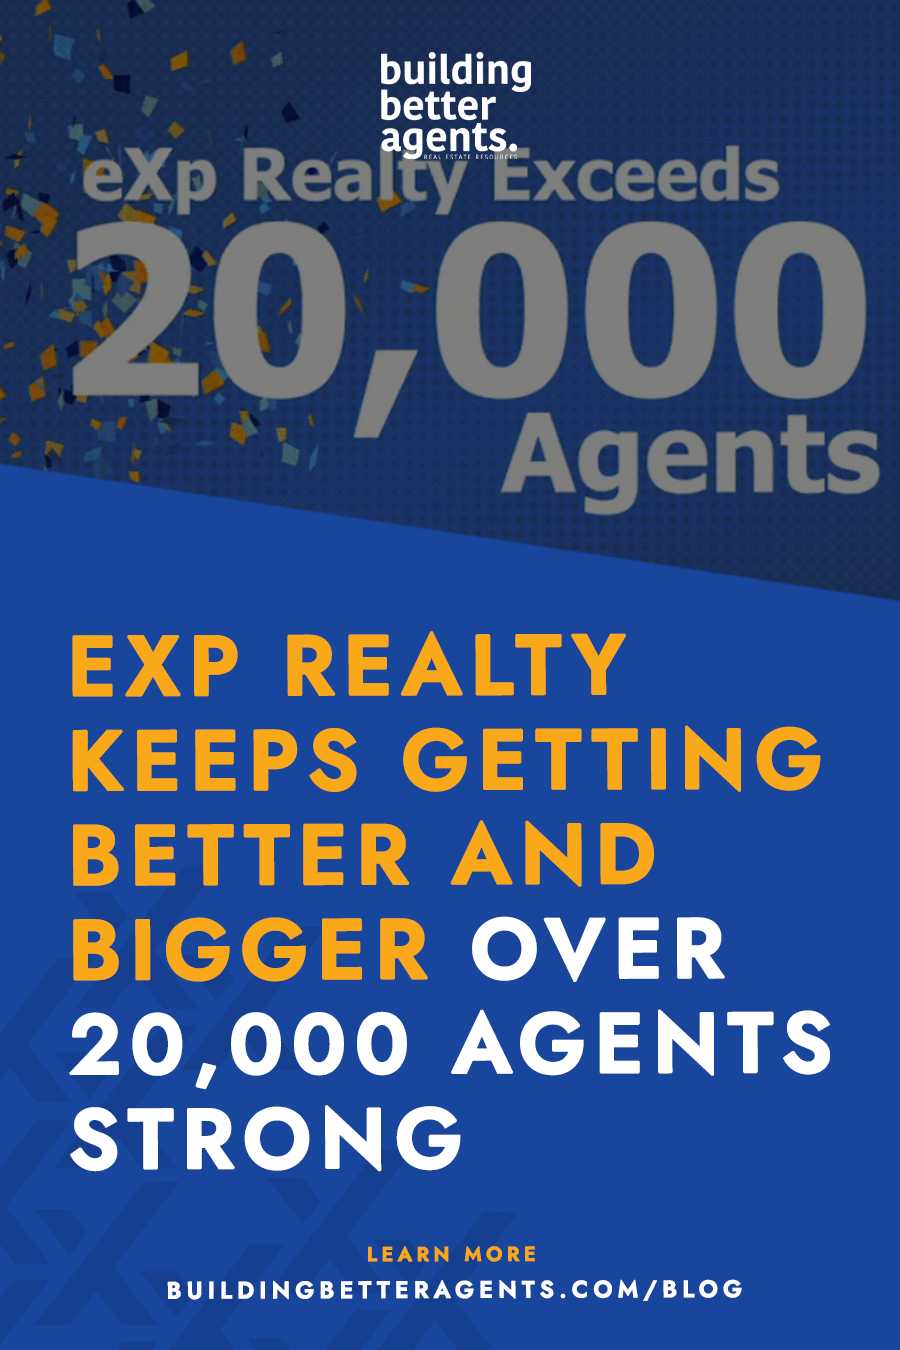 eXp Realty Over 20,000 Agents Strong